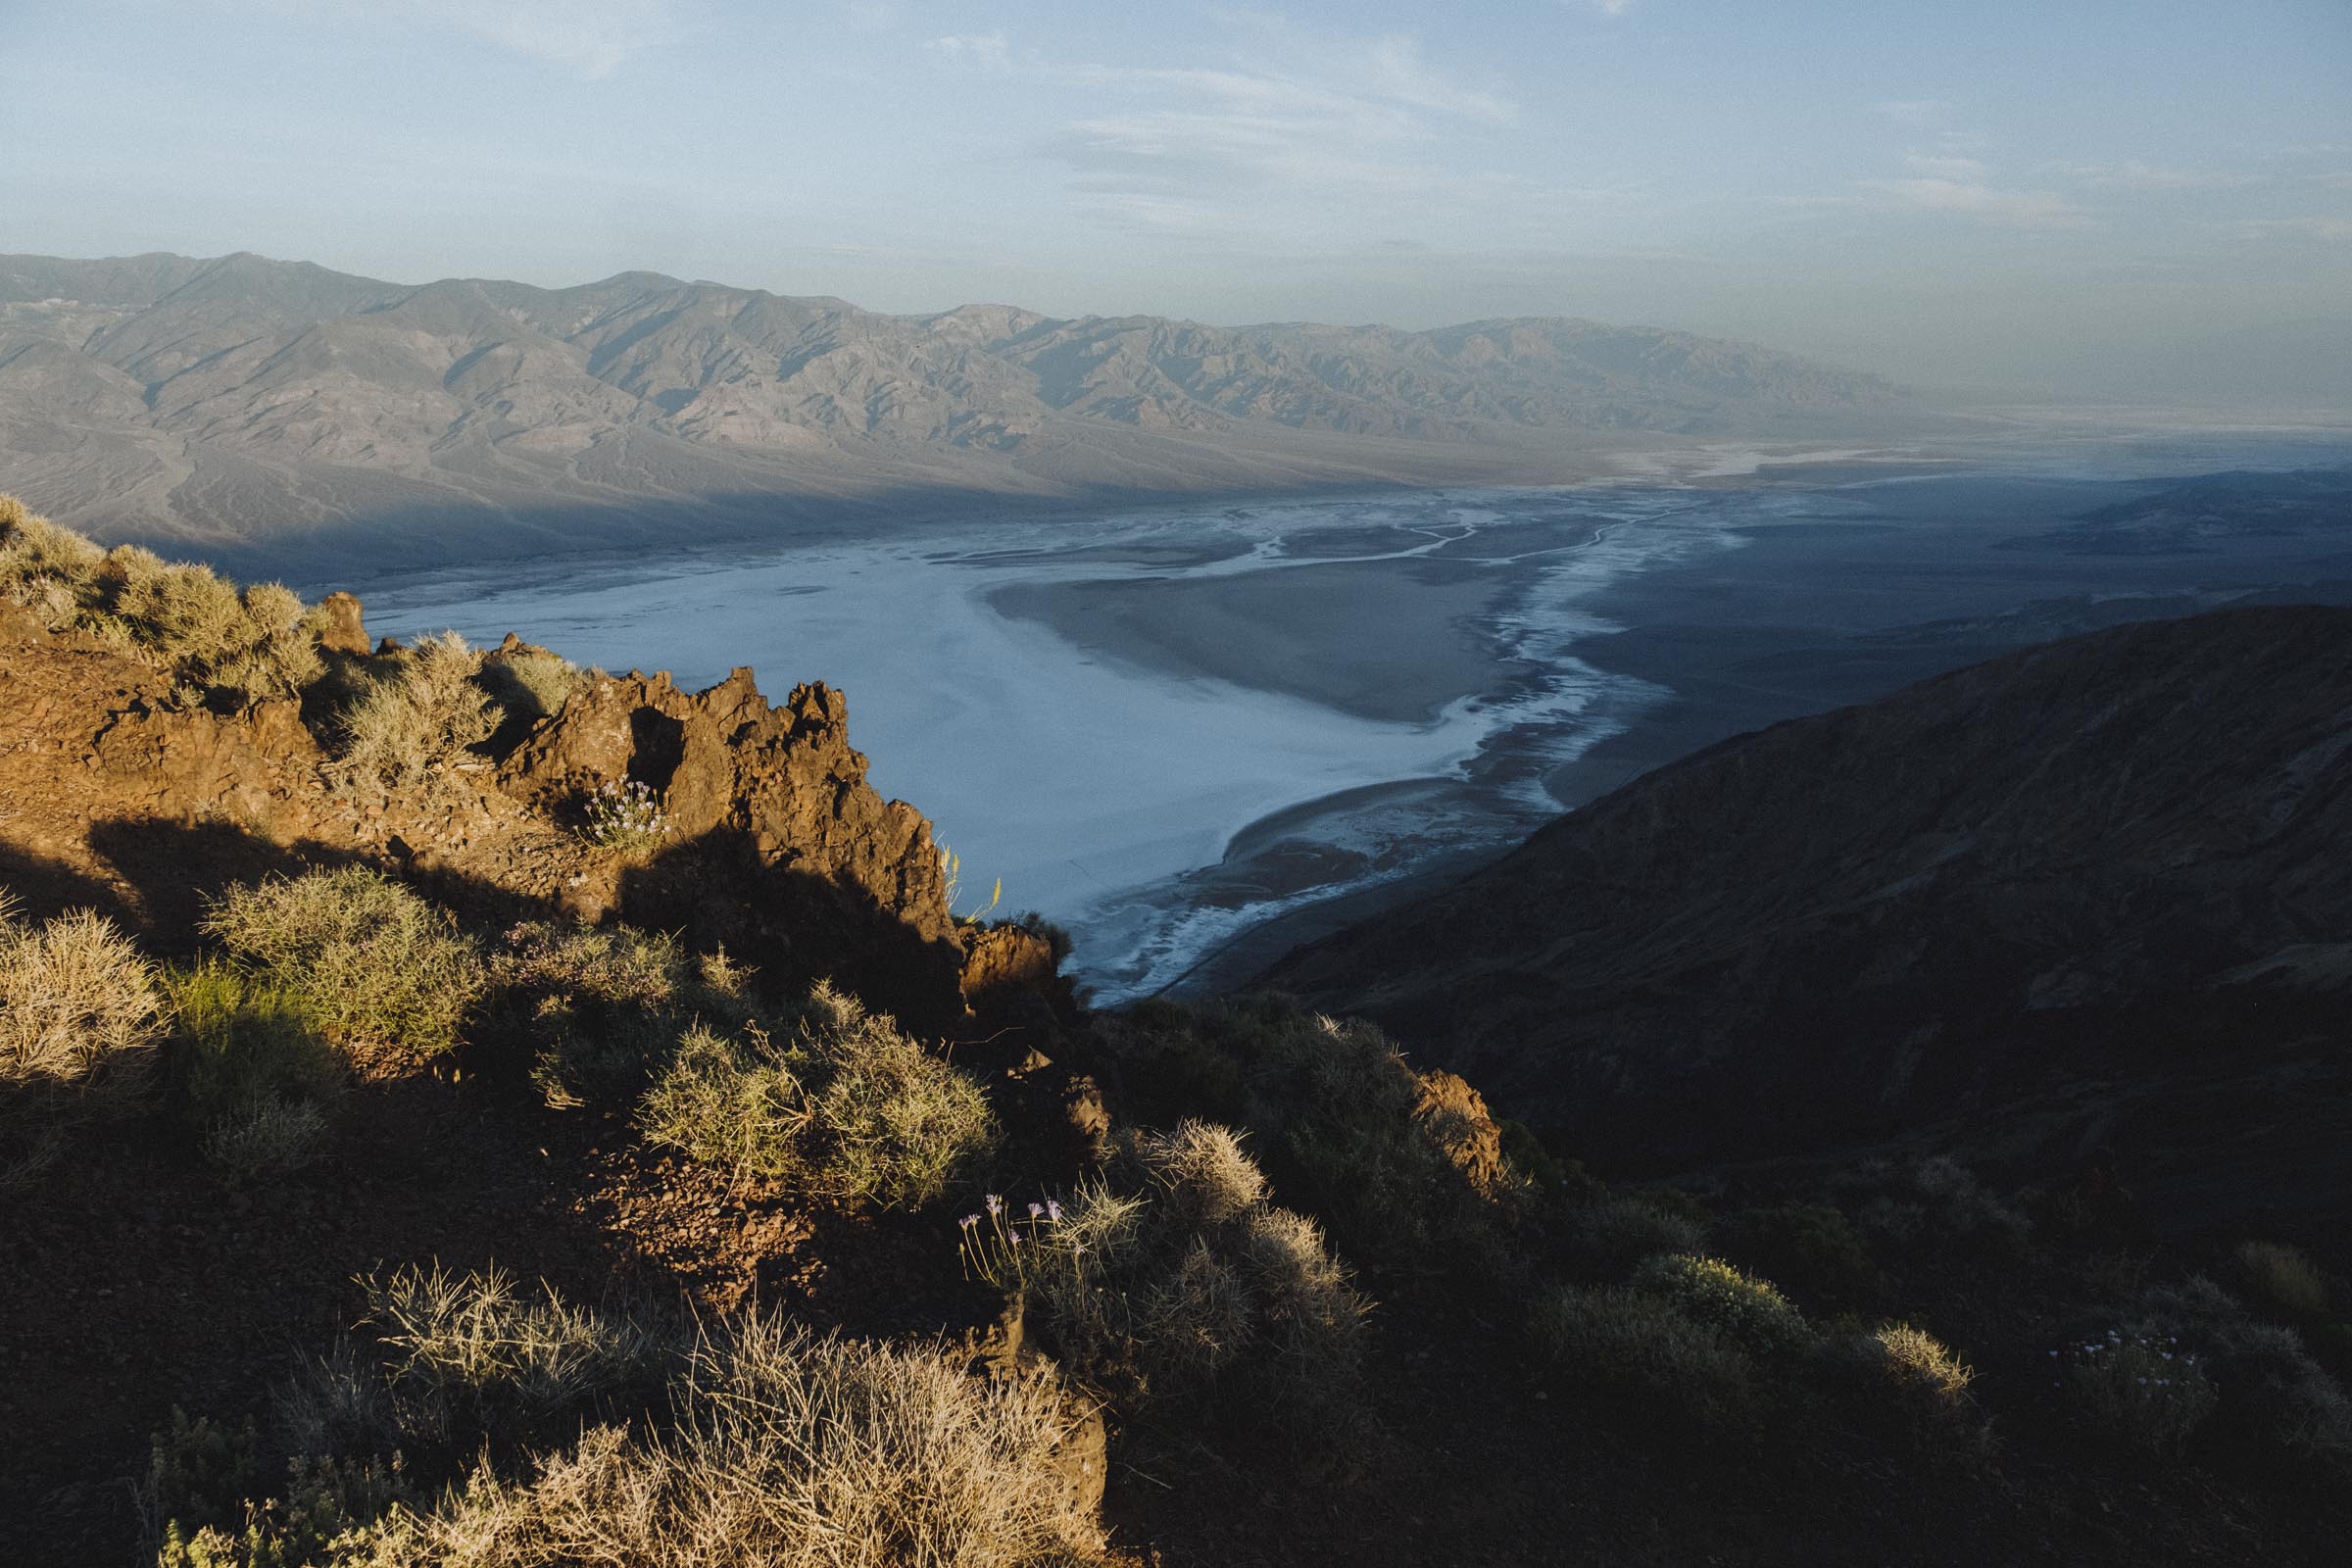 Above Badwater Basin and Death Valley from Dante's View